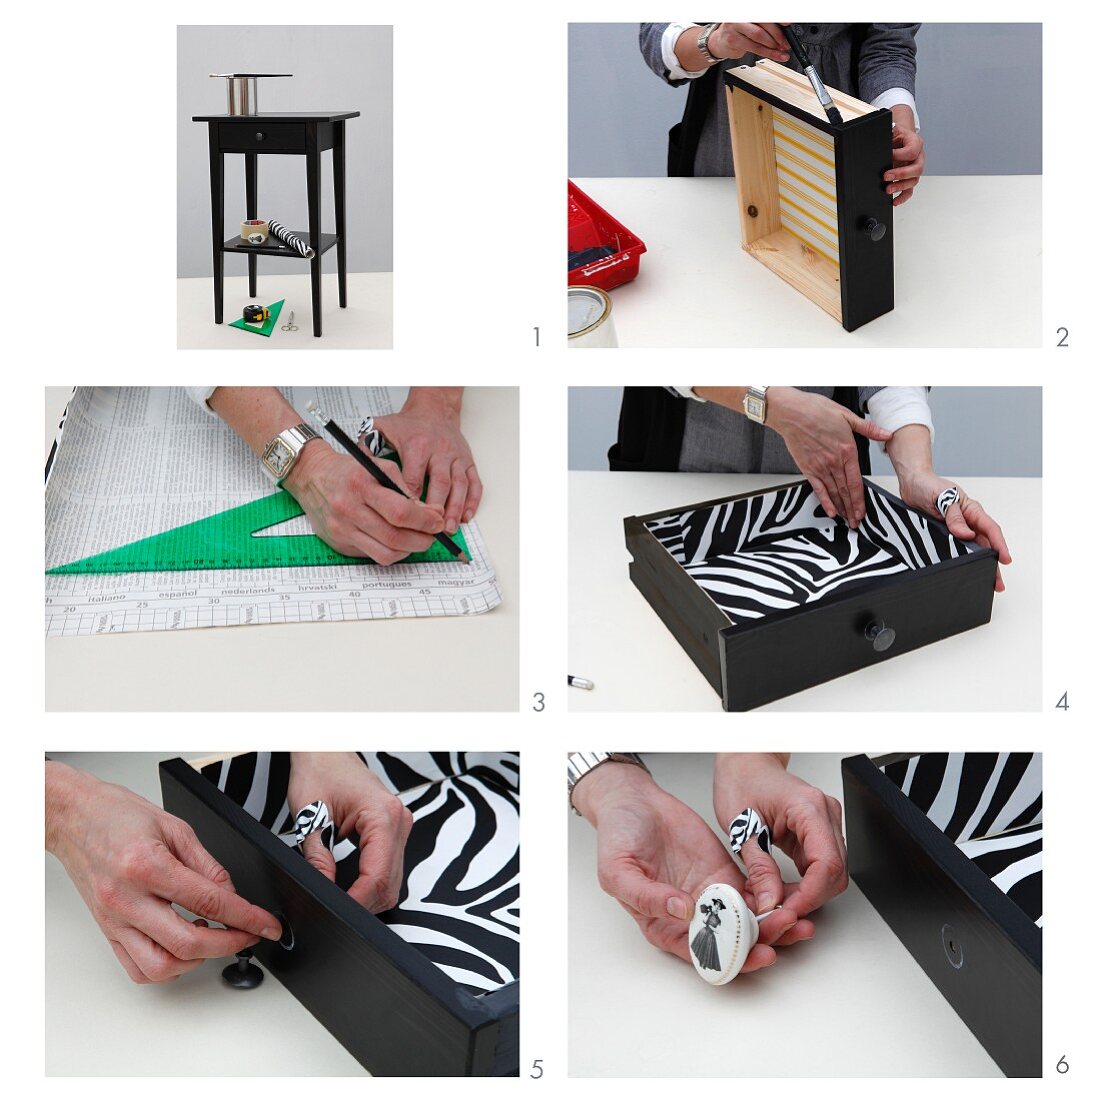 Instructions for refurbishing old drawer by painting it black and lining with zebra-print paper